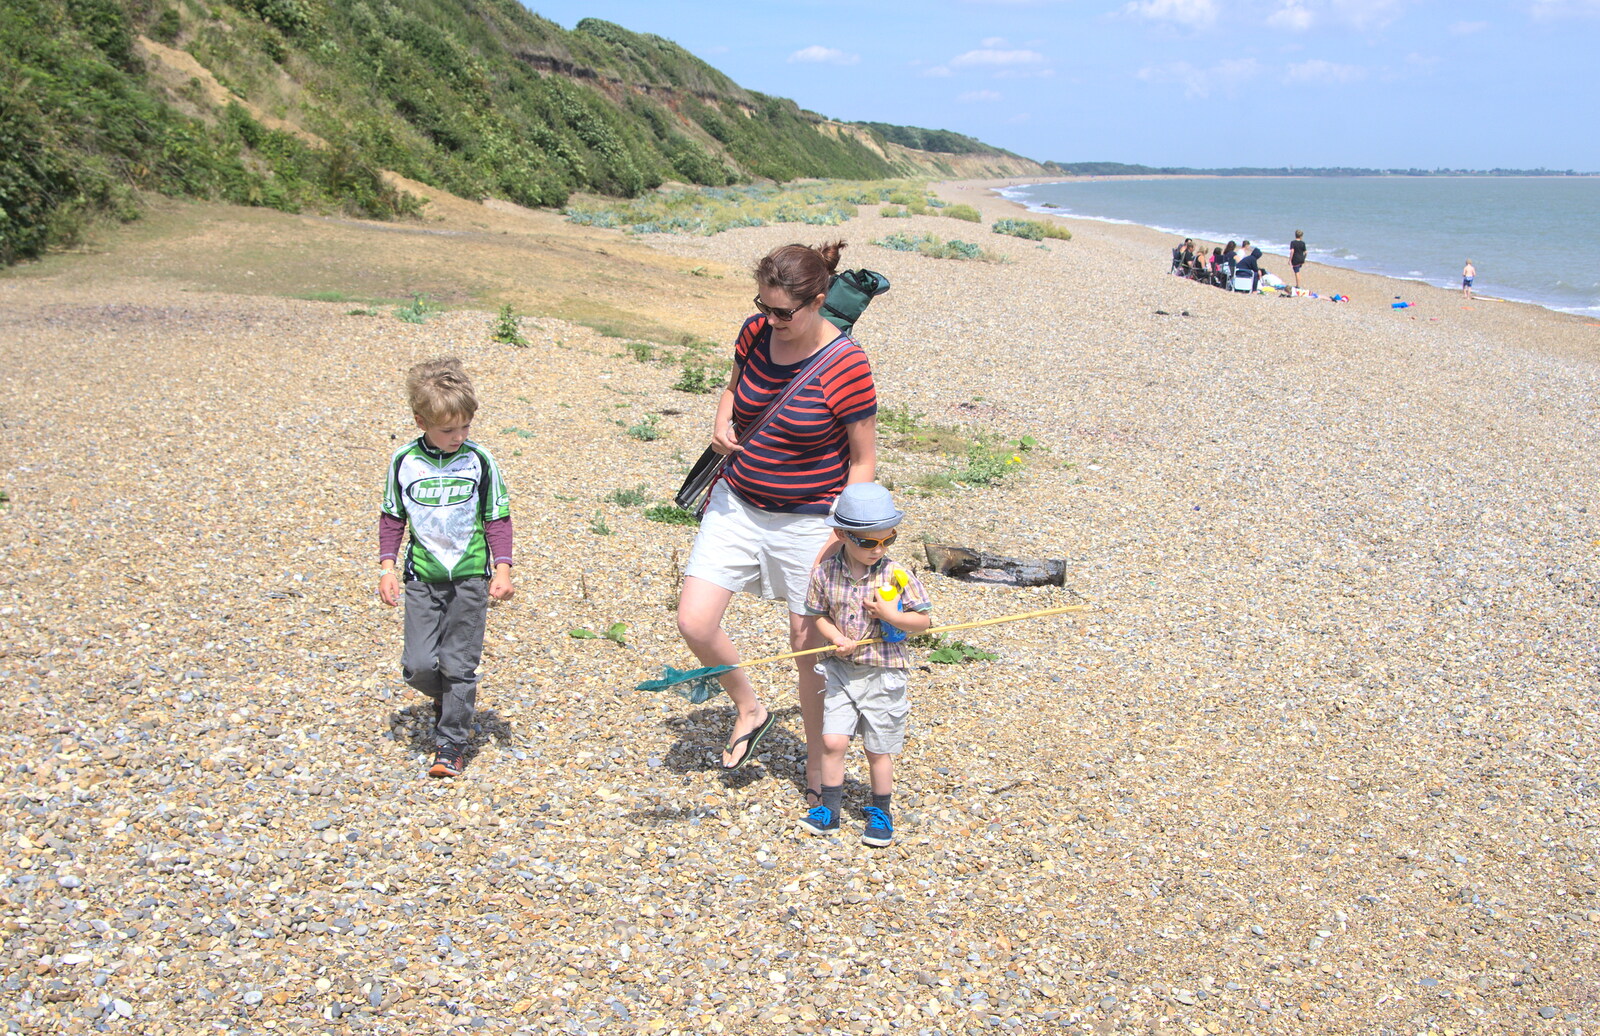 We pack up and head off from The Archaeology of Dunwich: A Camping Trip, Dunwich, Suffolk - 1st August 2015